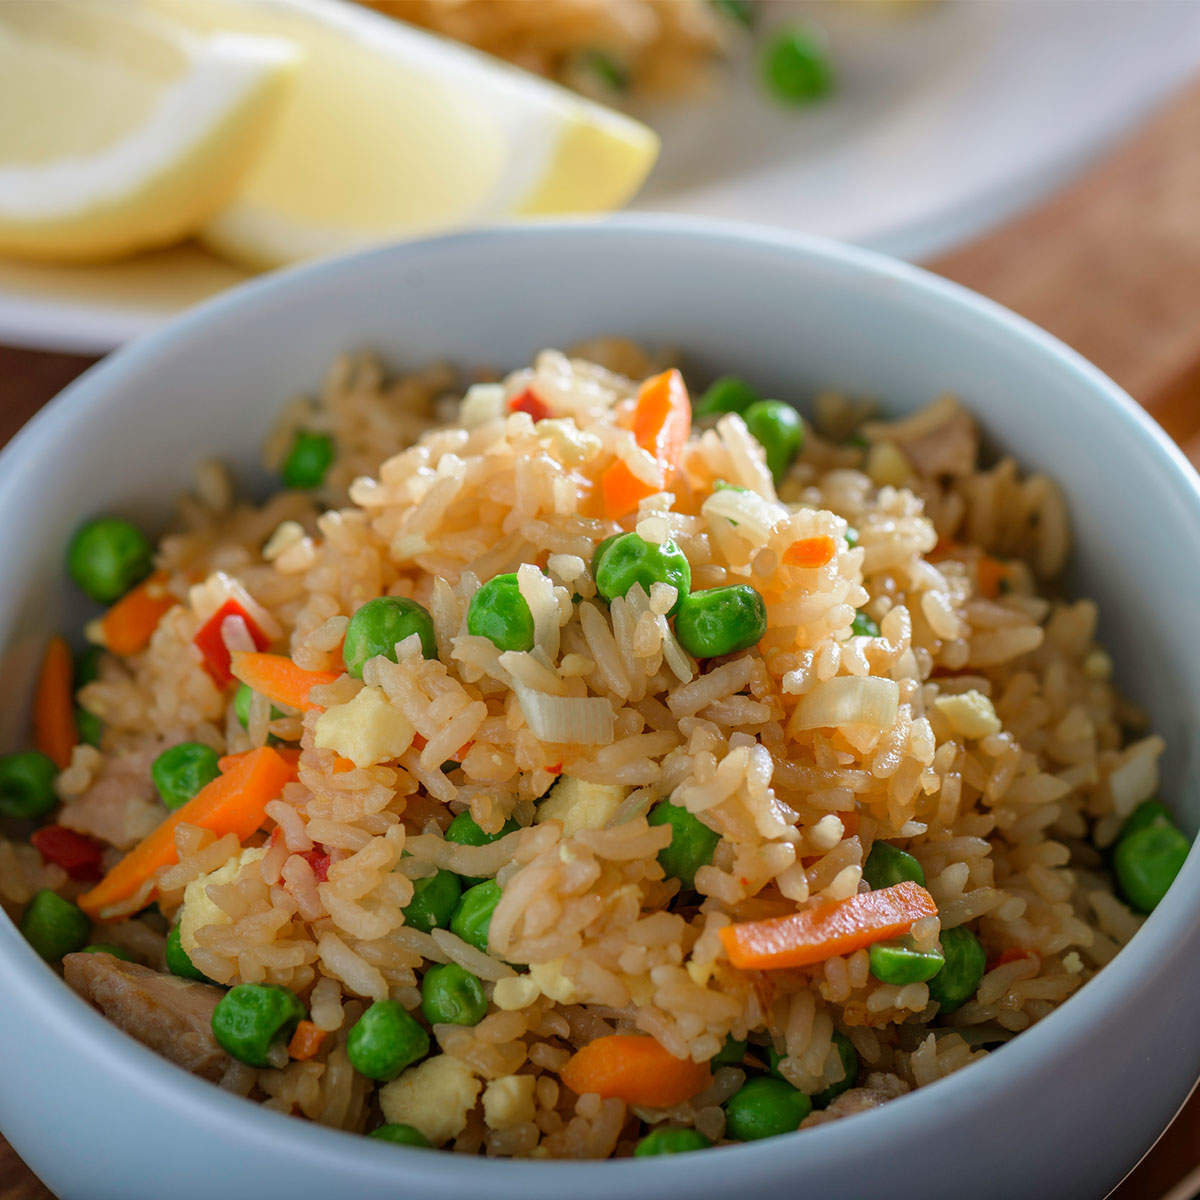 Fried Rice Recipe: How to make Fried Rice Recipe at Home | Homemade Fried Rice Recipe - Times Food